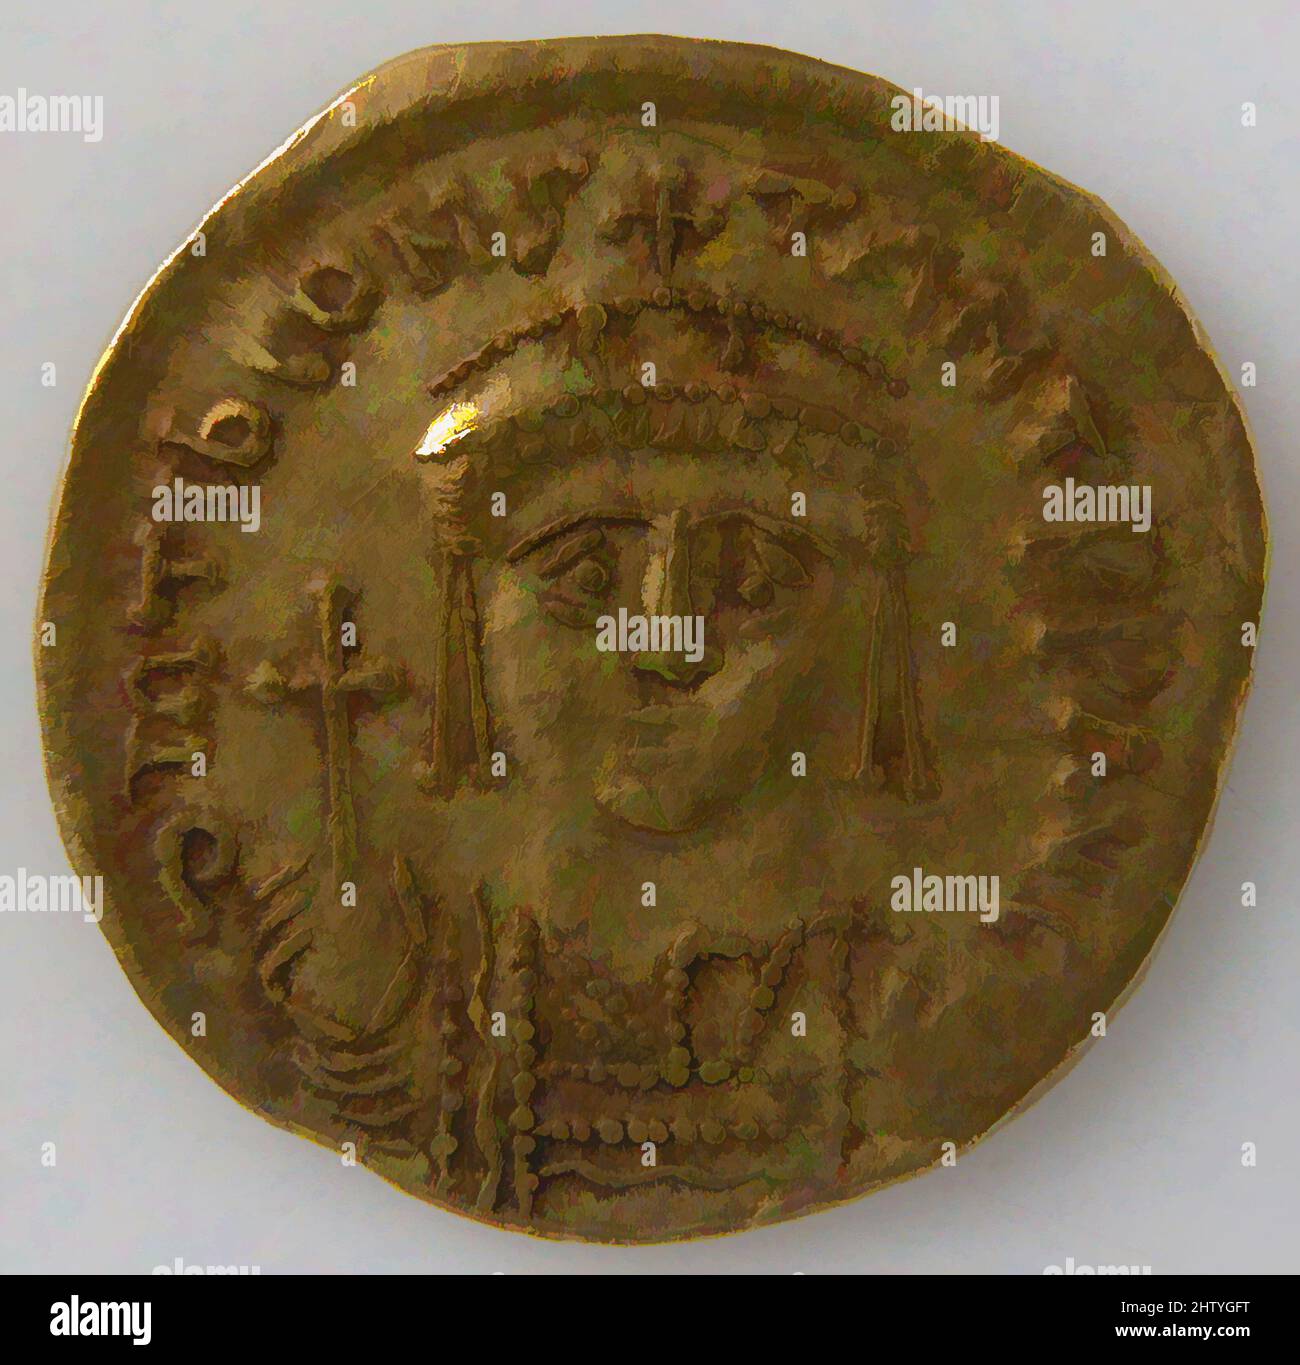 Art inspired by Solidus, 6th century (?), Byzantine, Gold, Overall: 13/16 x 1/16 in. (2 x 0.1 cm), Coins, Classic works modernized by Artotop with a splash of modernity. Shapes, color and value, eye-catching visual impact on art. Emotions through freedom of artworks in a contemporary way. A timeless message pursuing a wildly creative new direction. Artists turning to the digital medium and creating the Artotop NFT Stock Photo